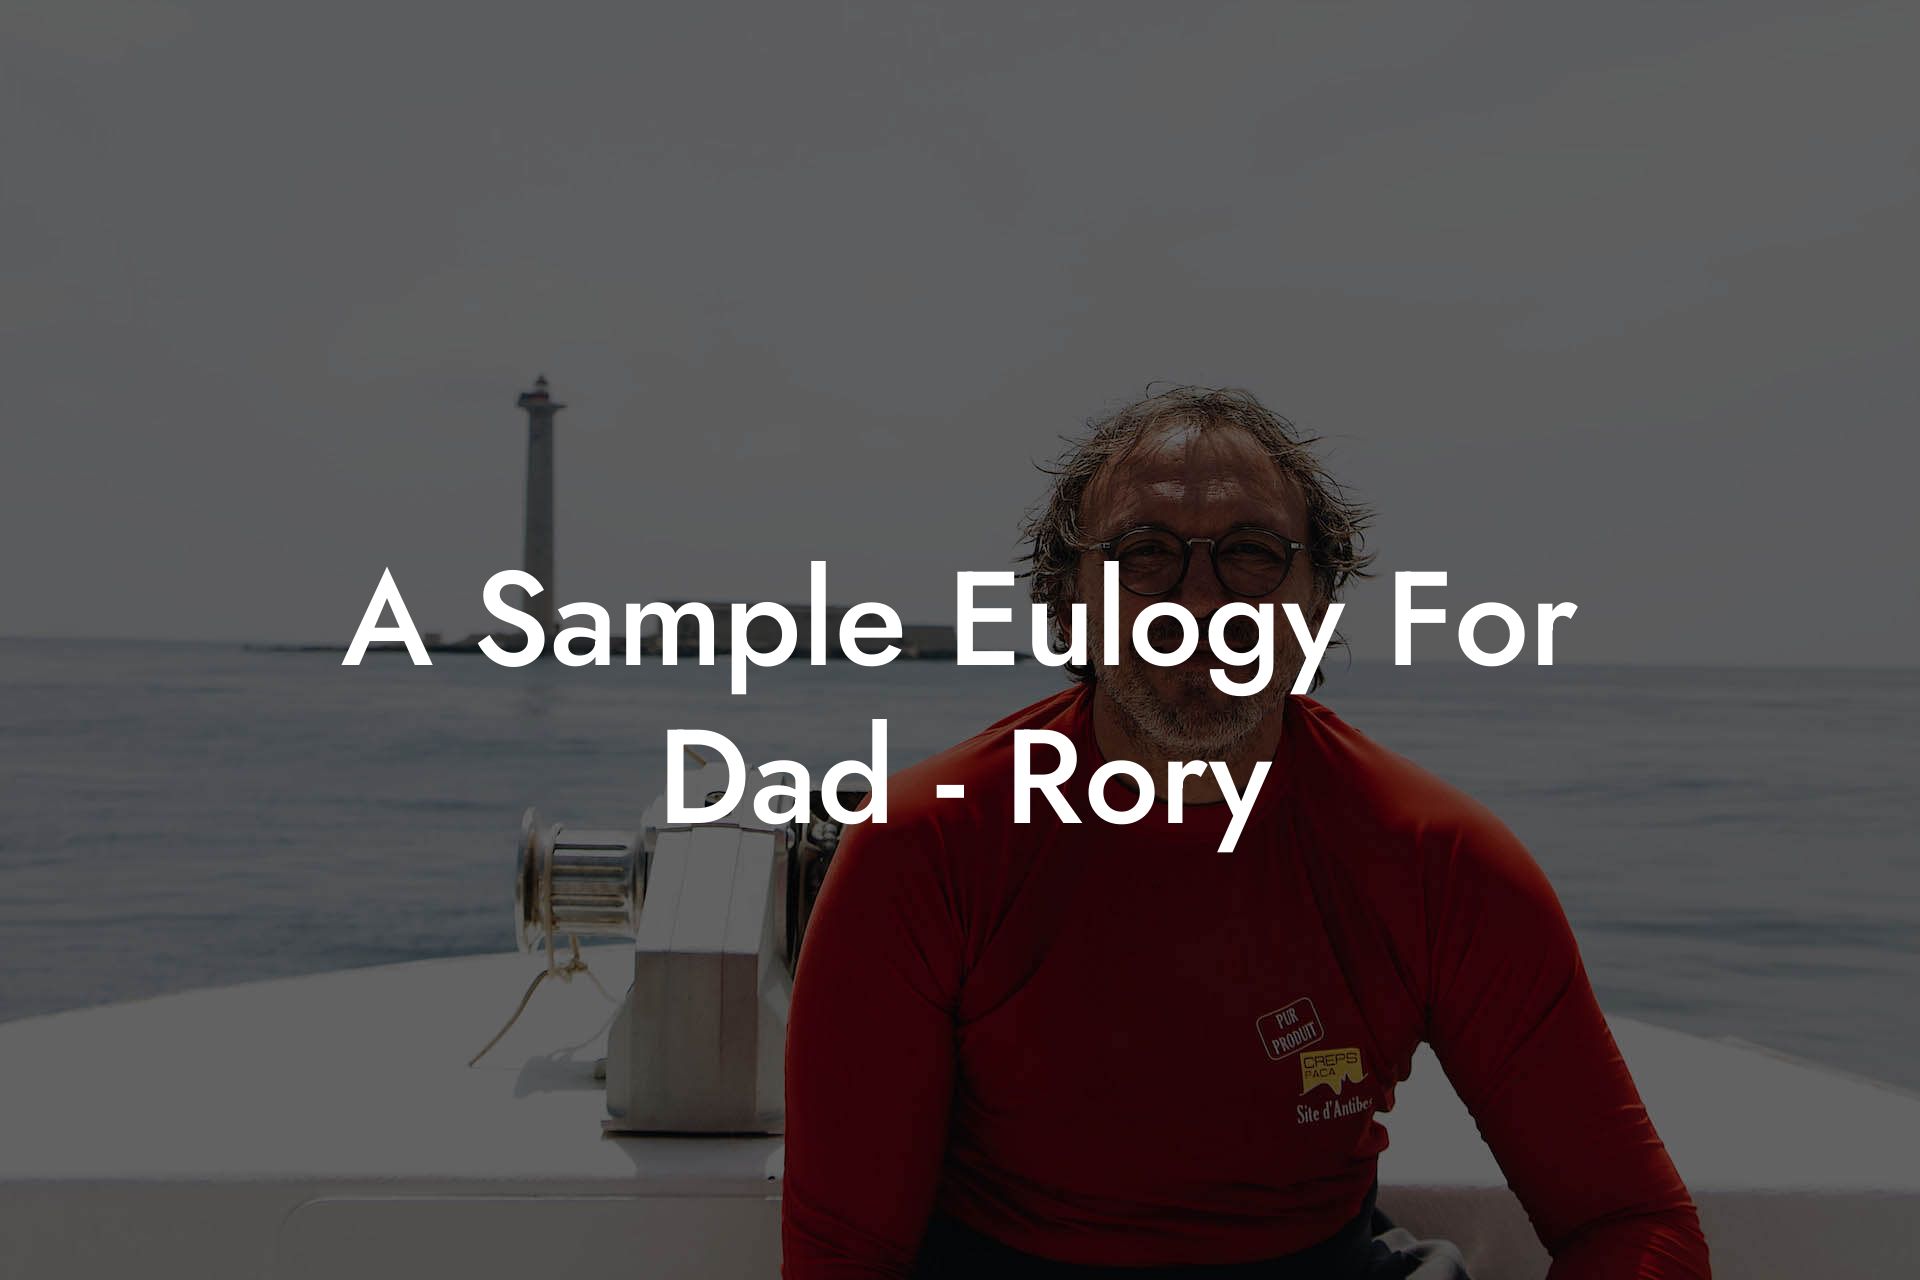 A Sample Eulogy For Dad - Rory